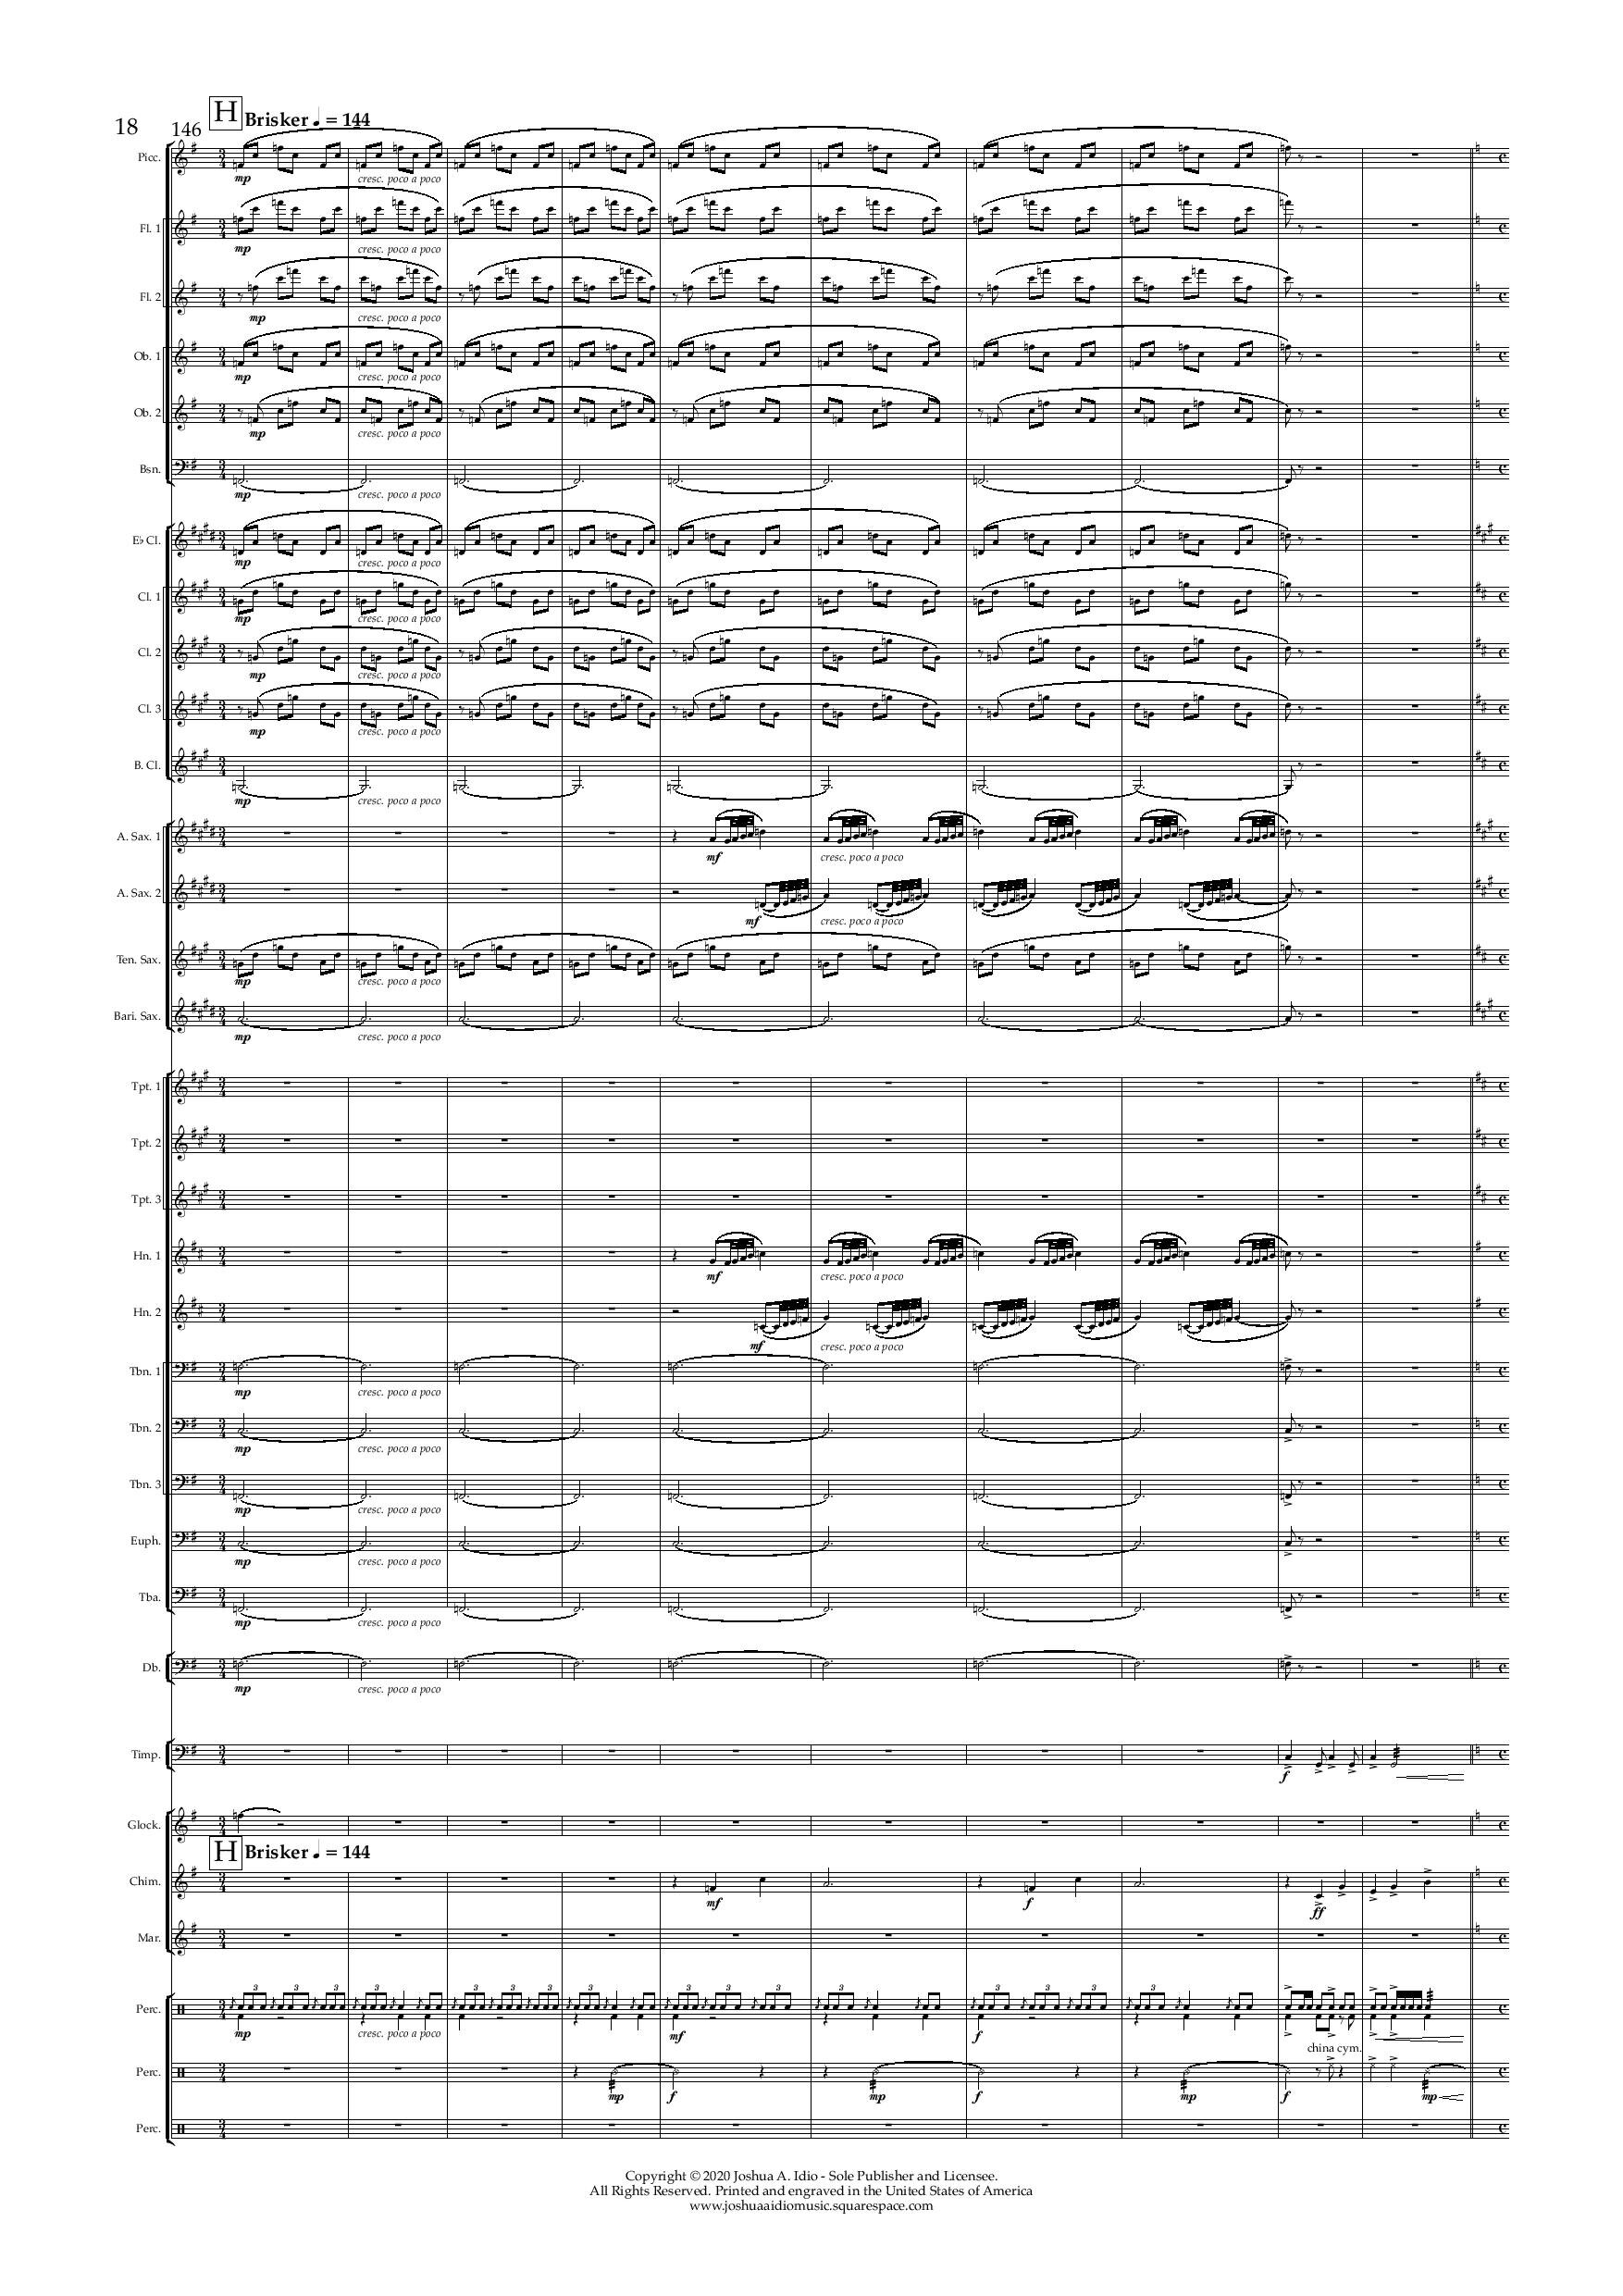 The Cruise Line Dream - Conductor s Score-page-018.jpg